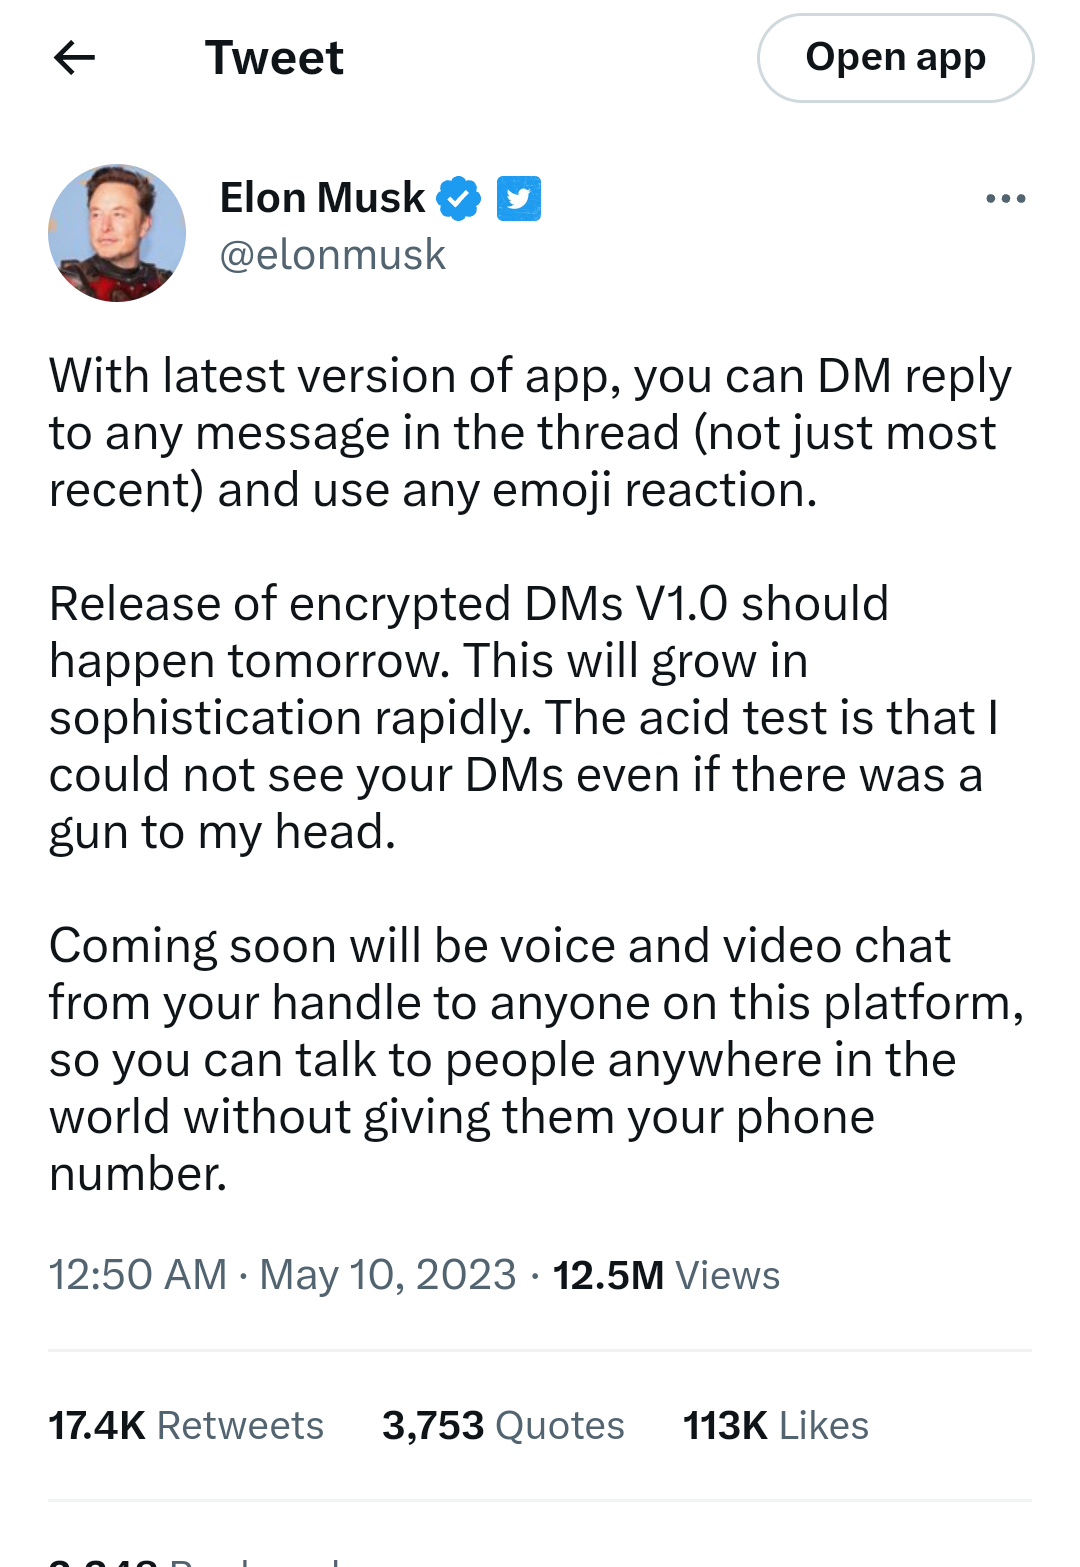 Twitter to soon allow calls and encrypted messaging - Elon Musk says